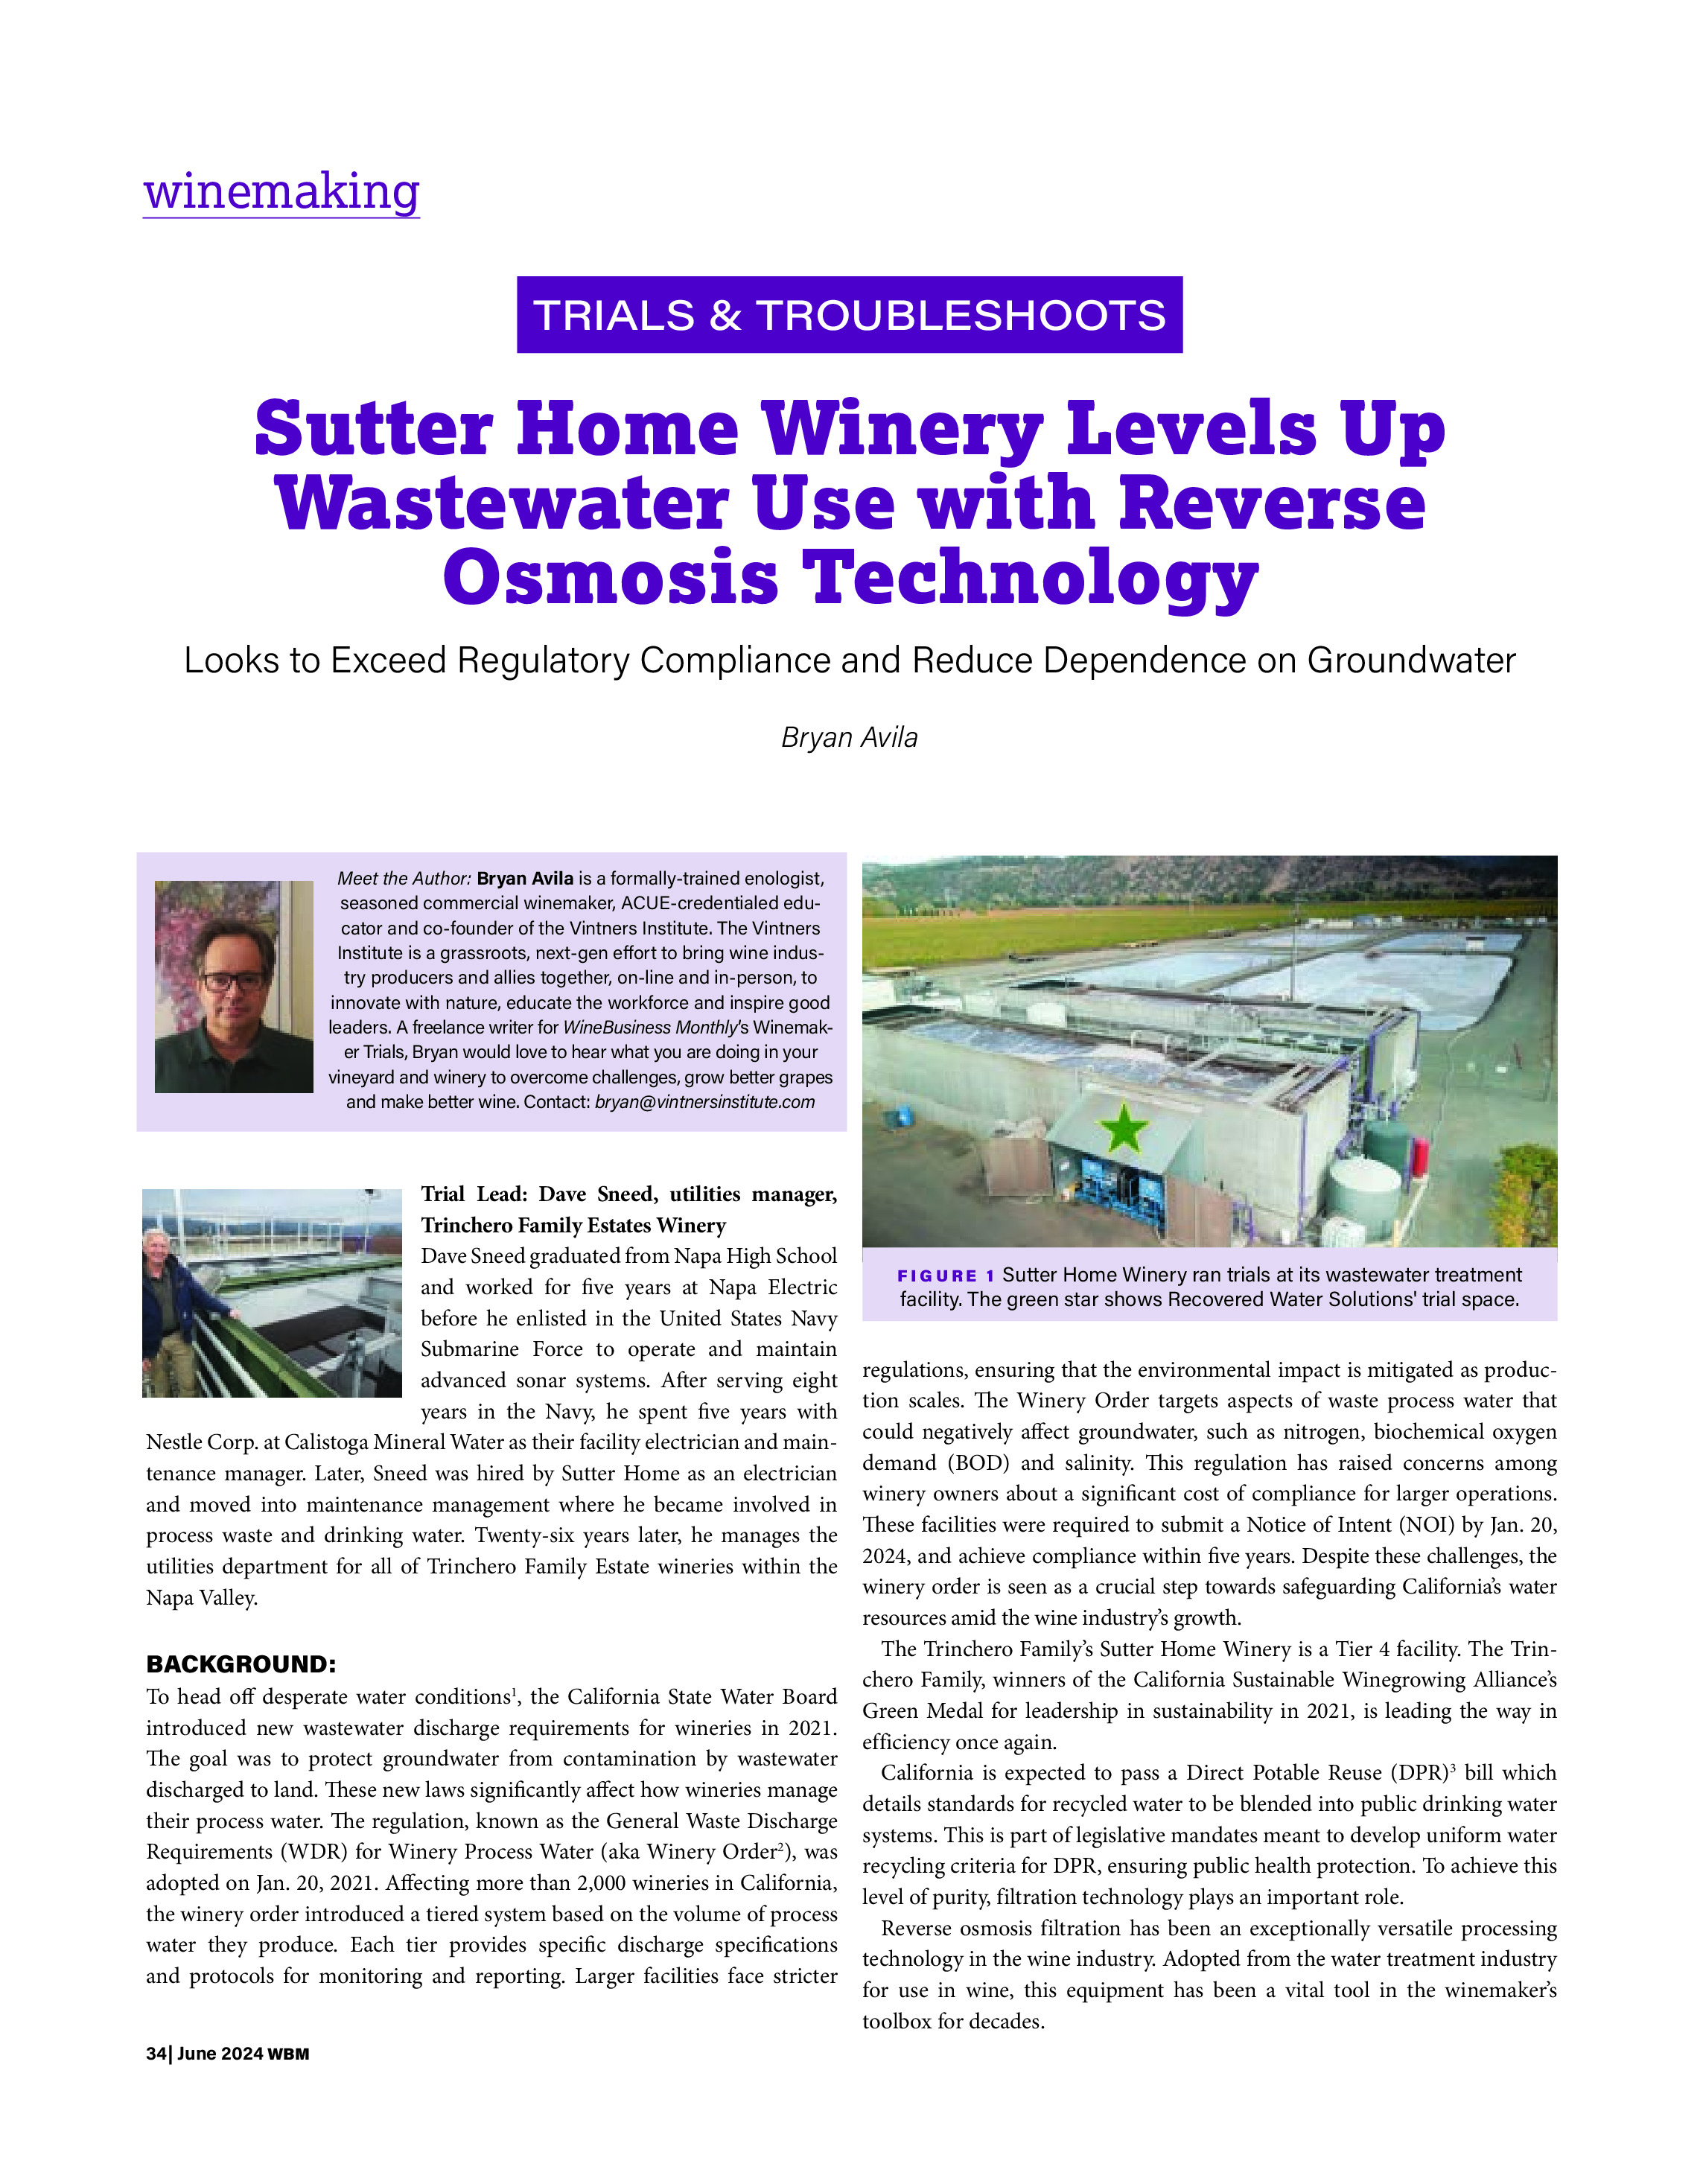 Sutter Home Winery Levels Up Wastewater Use with Reverse Osmosis